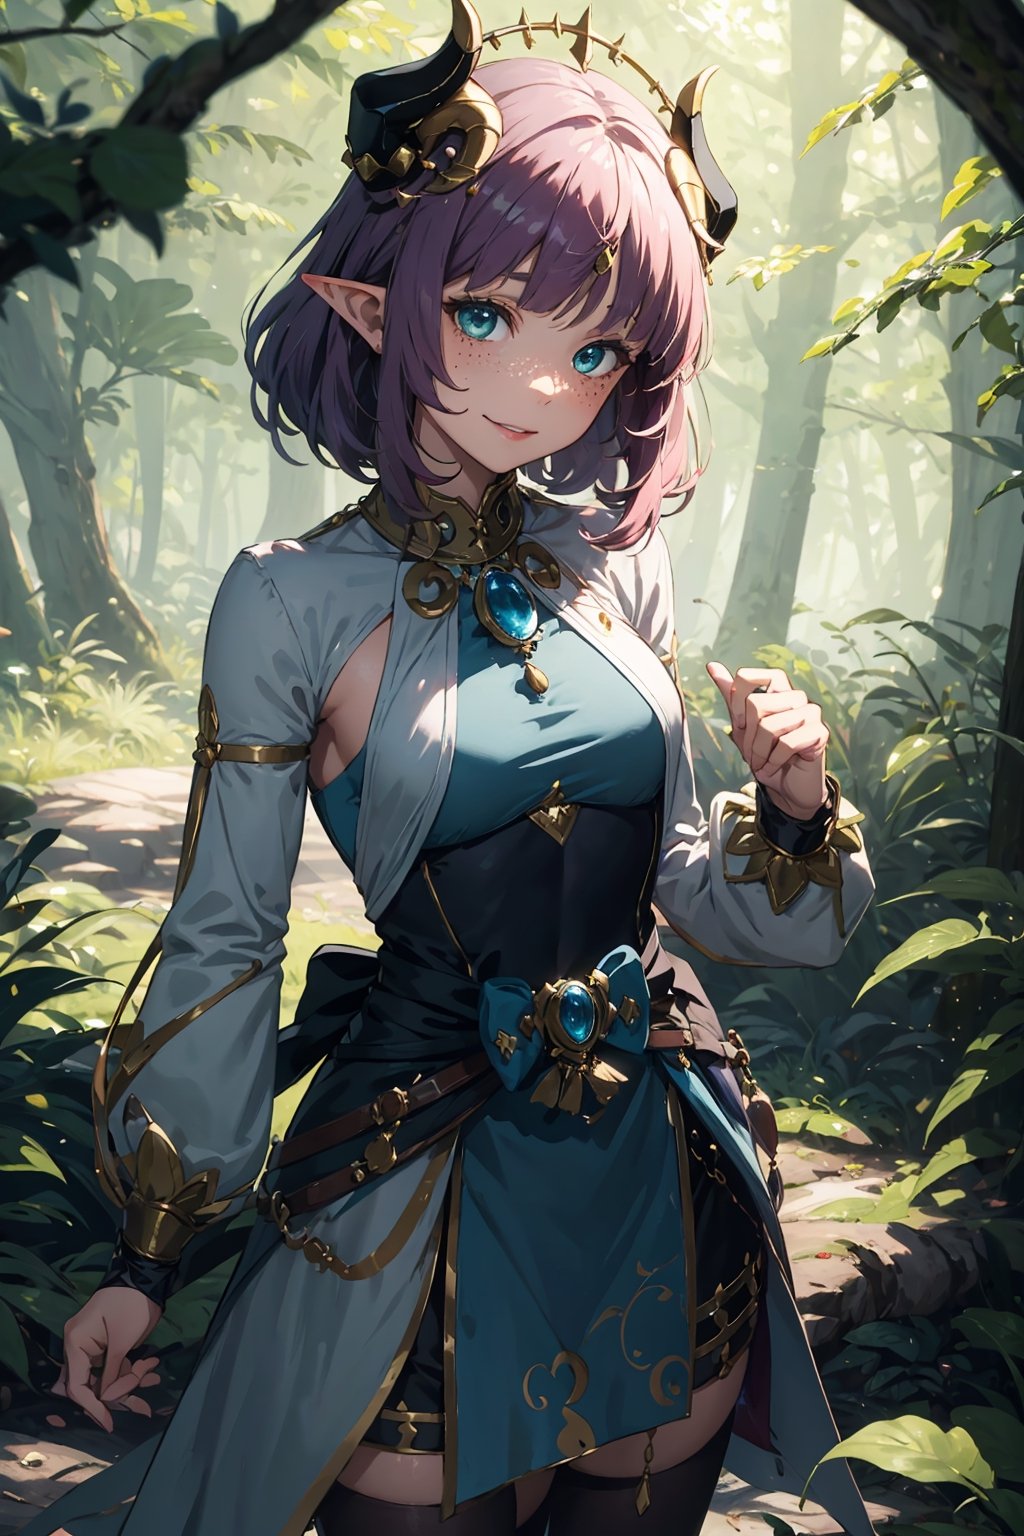 Imagine a female child with short messy vibrant purple hair in a short hair cut. She has small breasts. She has bright green eyes. She has pointed elf ears. She has two short horns on her head. She has an evil smile on her face that shows she's up to no good. She has warm freckles on her face. She wears a modest outfit with a long green trench coat with lots of pockets. She is practicing magic that sparkles around her. The background is a charming forest path in the enchanted woods with bright lighting, creating a magical ambiance. This artwork captures the essence of mischief and magic against the backdrop of a beautiful setting. detailed, detail_eyes, detailed_hair, detailed_scenario, detailed_hands, detailed_background, vox machina style,vox machina style,oil impasto, flat chest.,,niloudef,